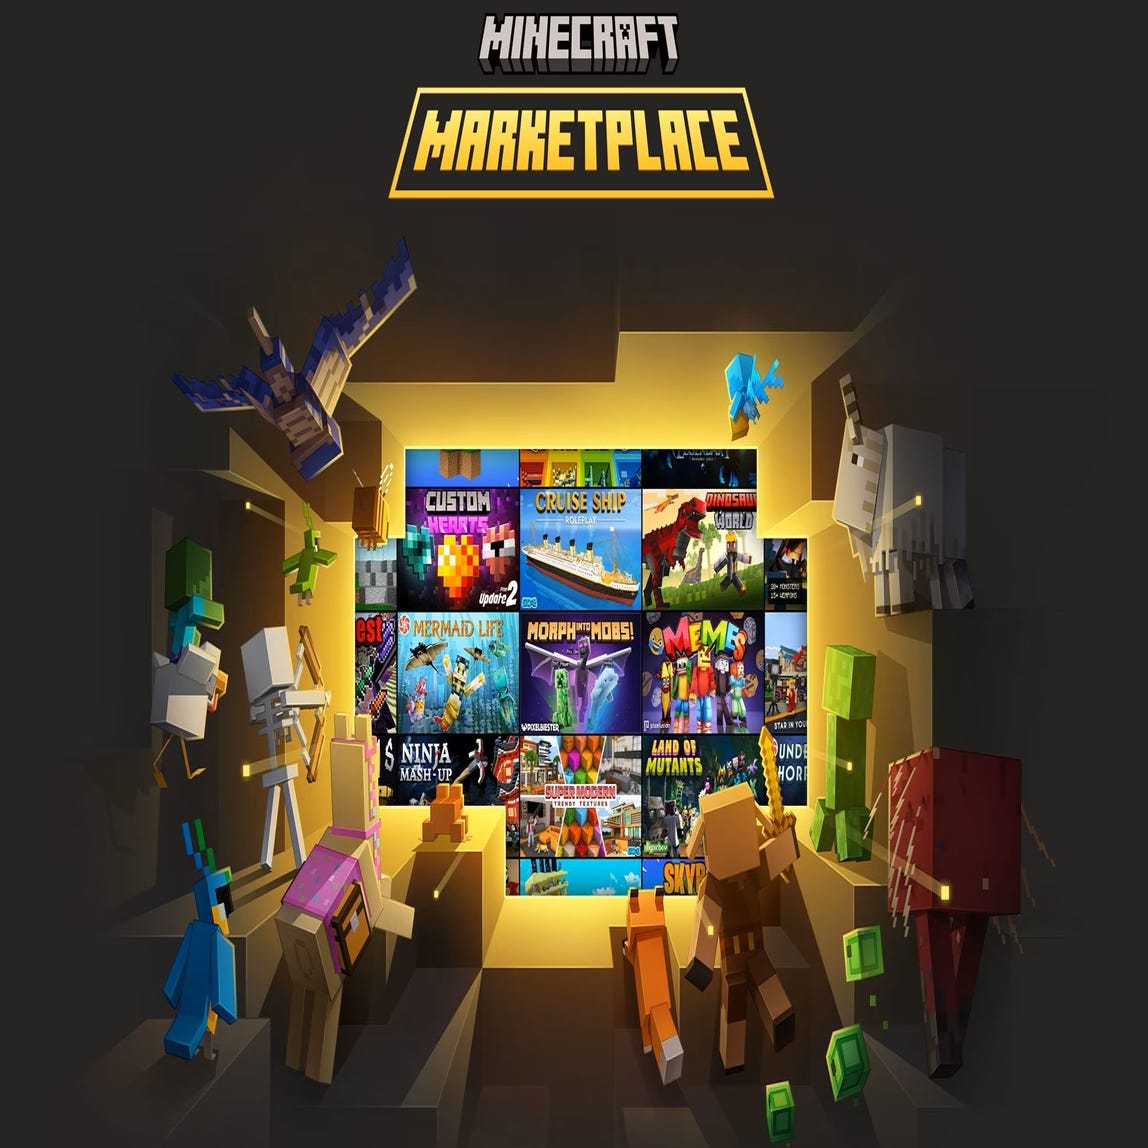 Minecraft introduces new season pass for in-game Marketplace